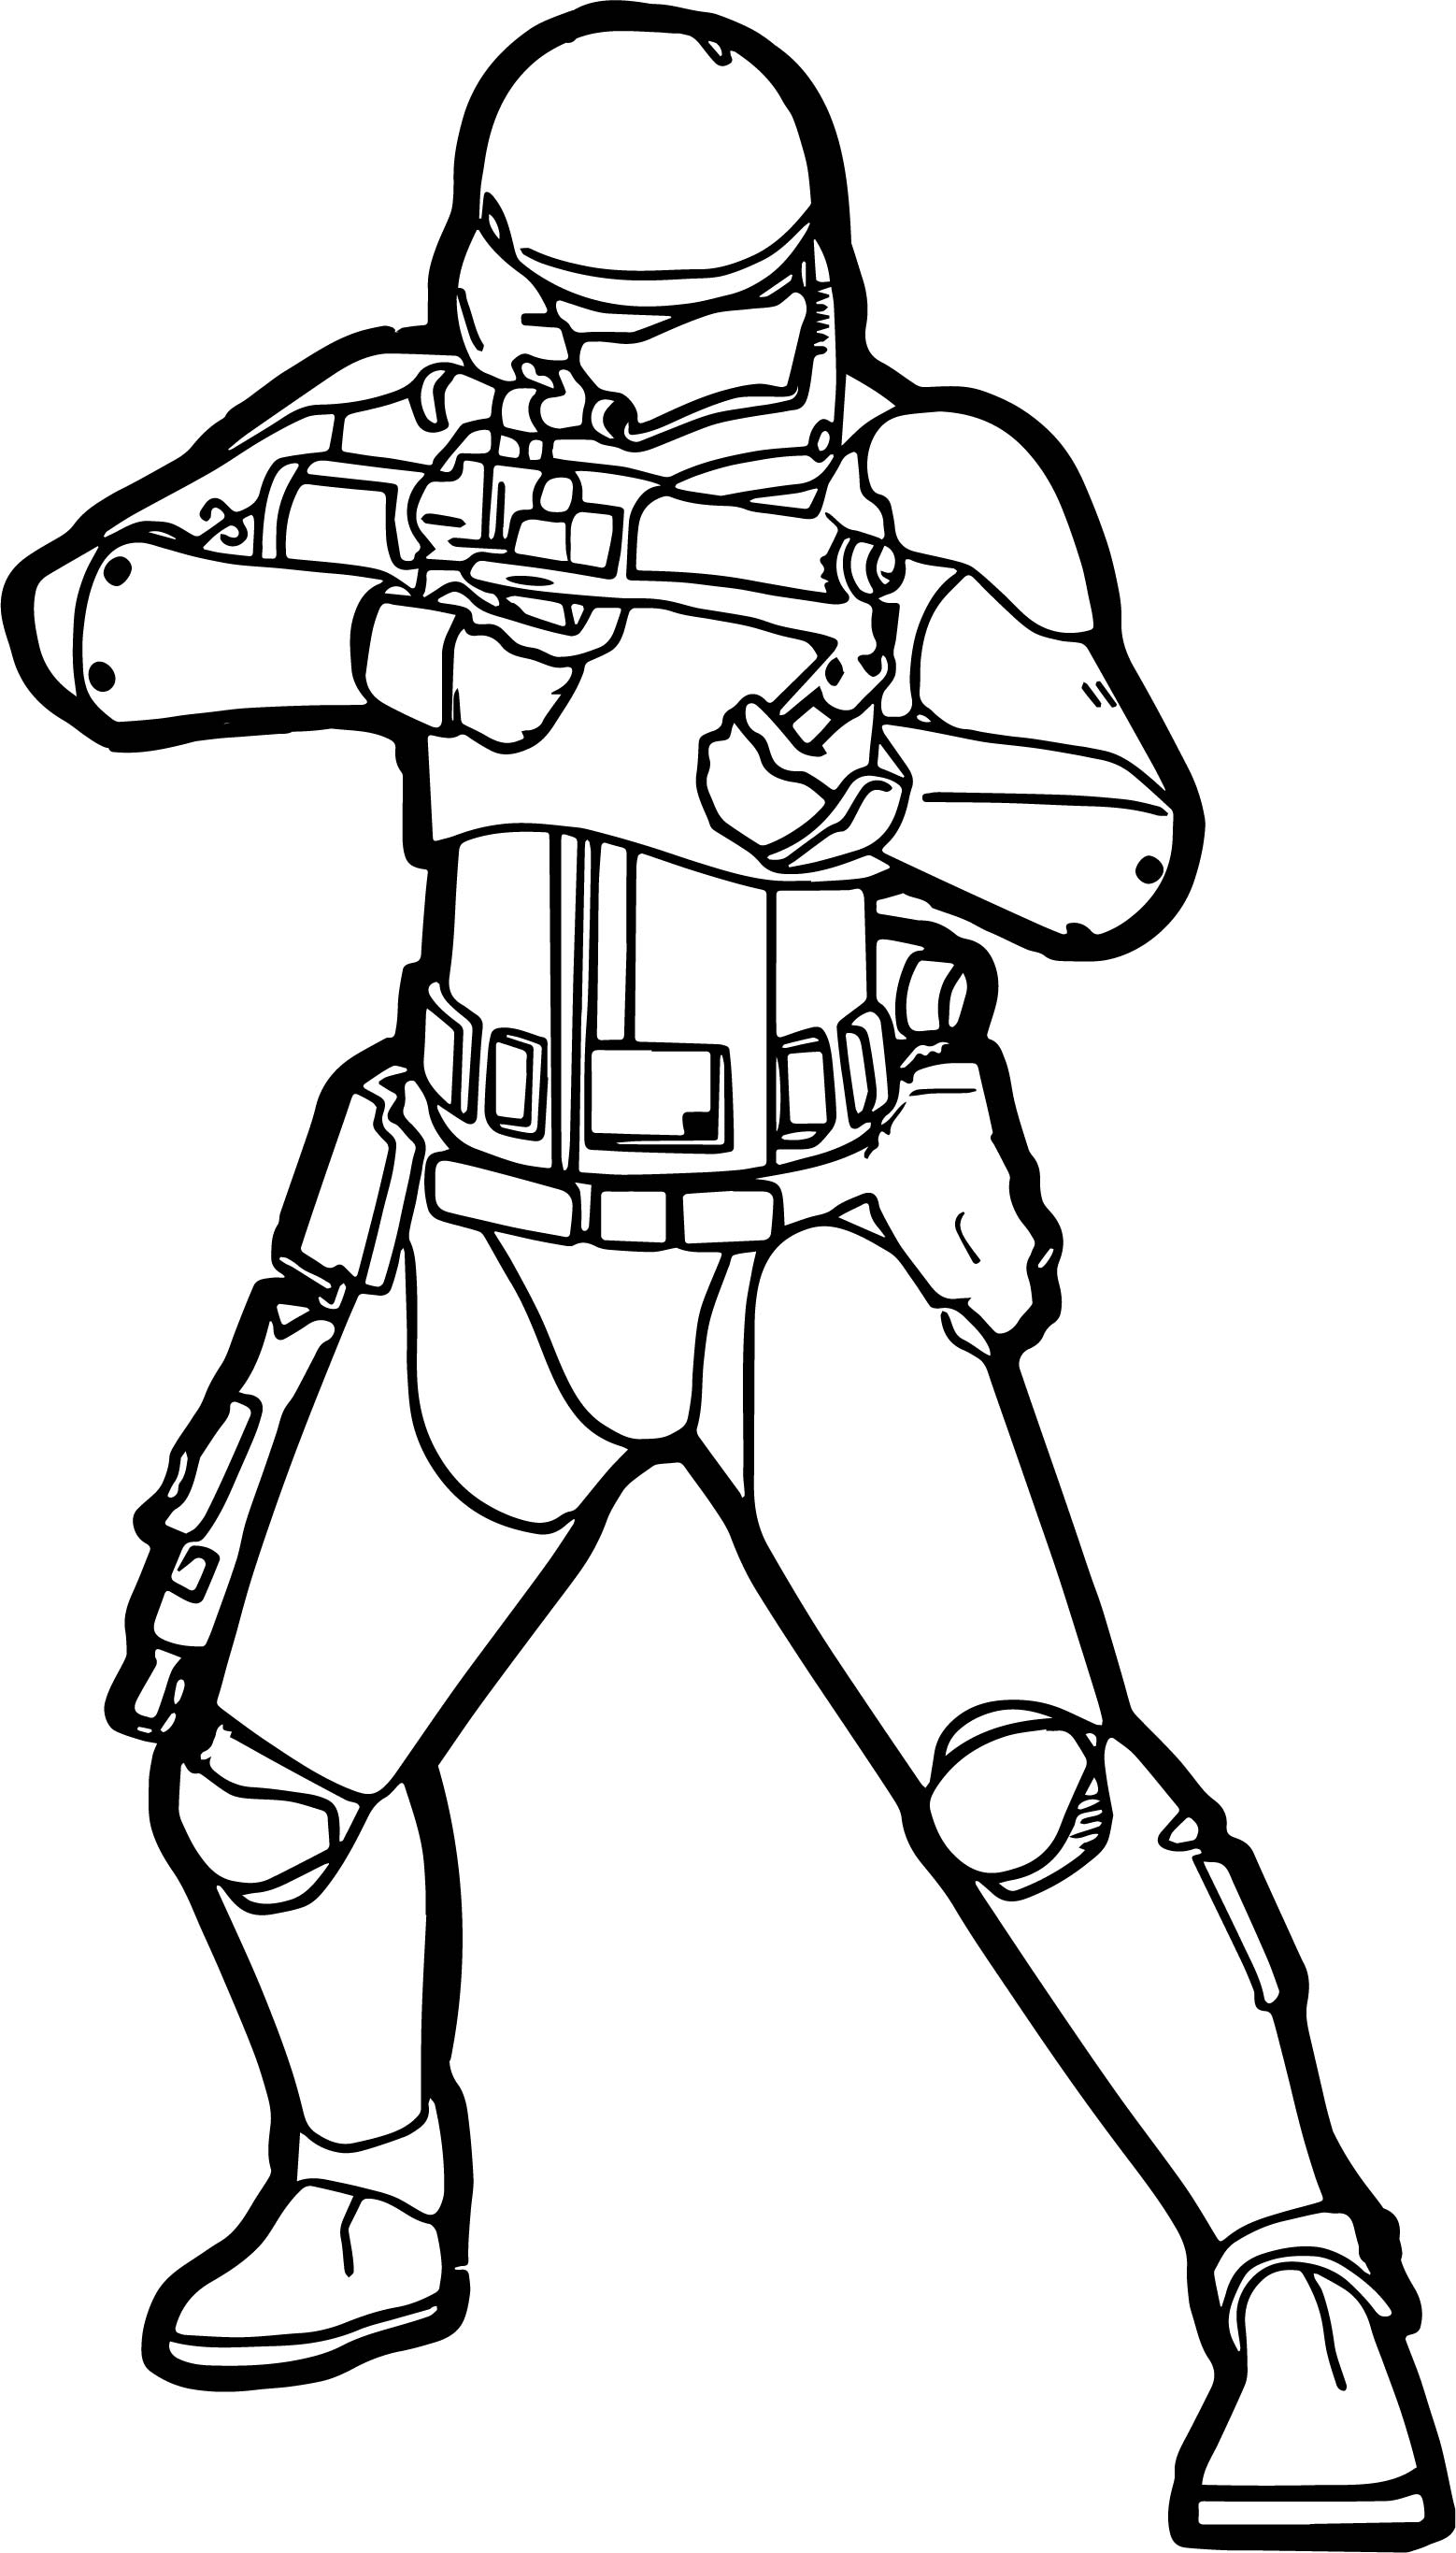 Stormtrooper Coloring Page at Free